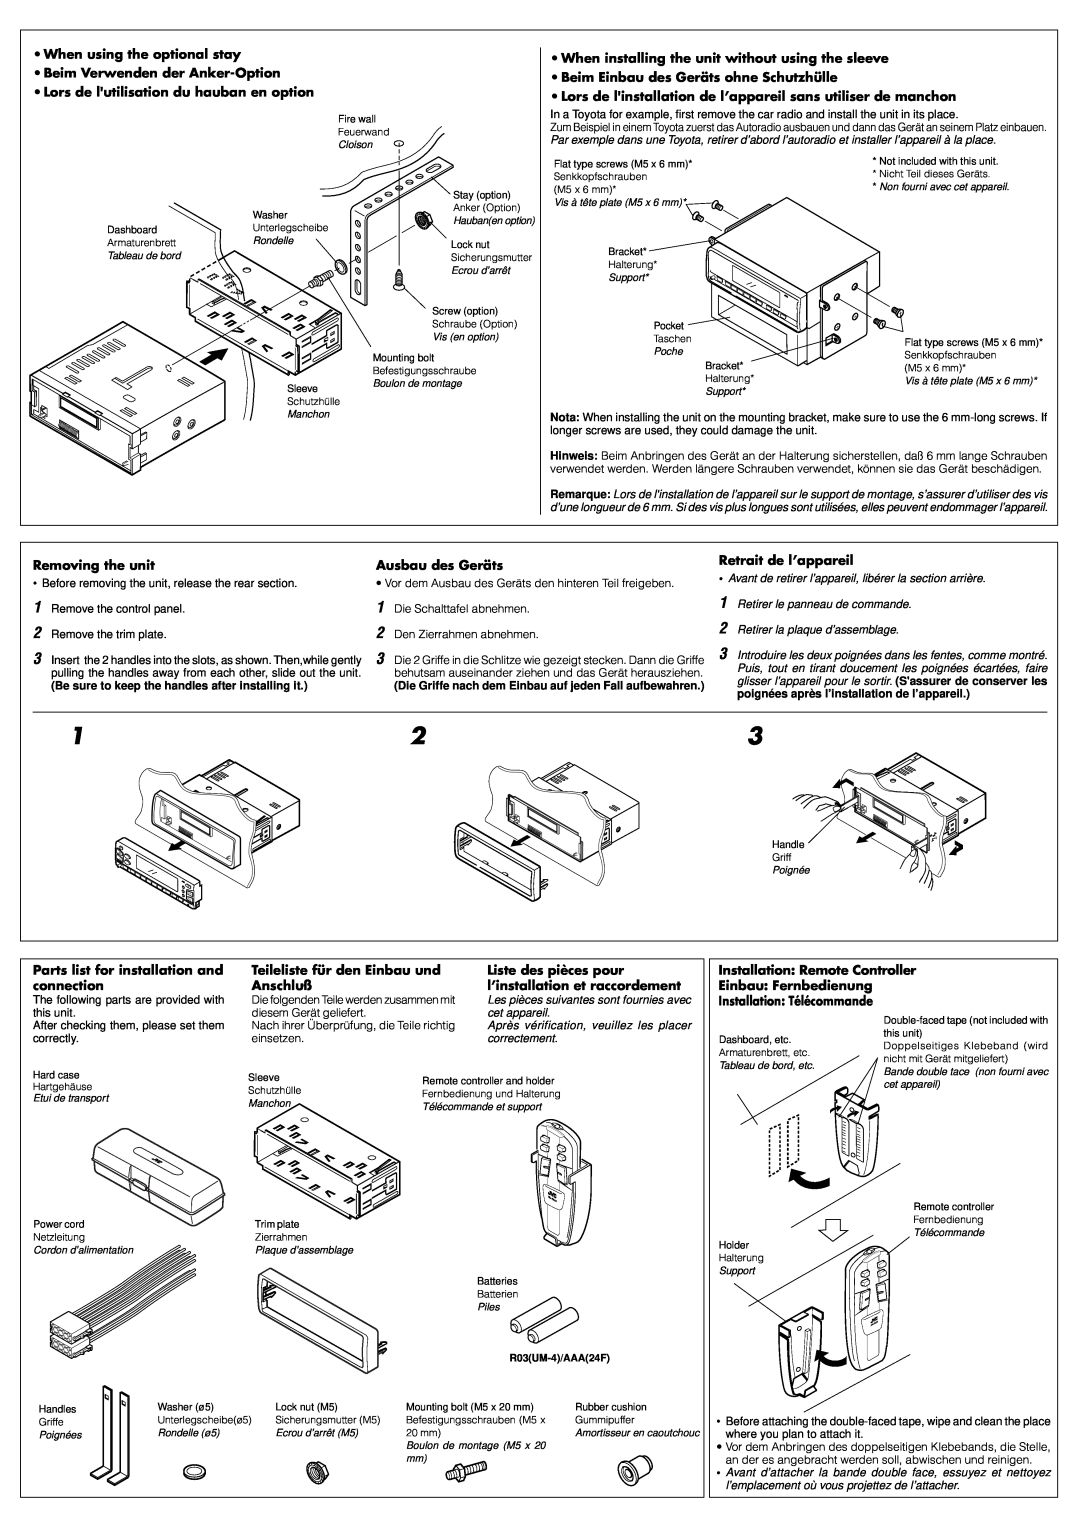 JVC KS-FX833 manual When installing the unit without using the sleeve 